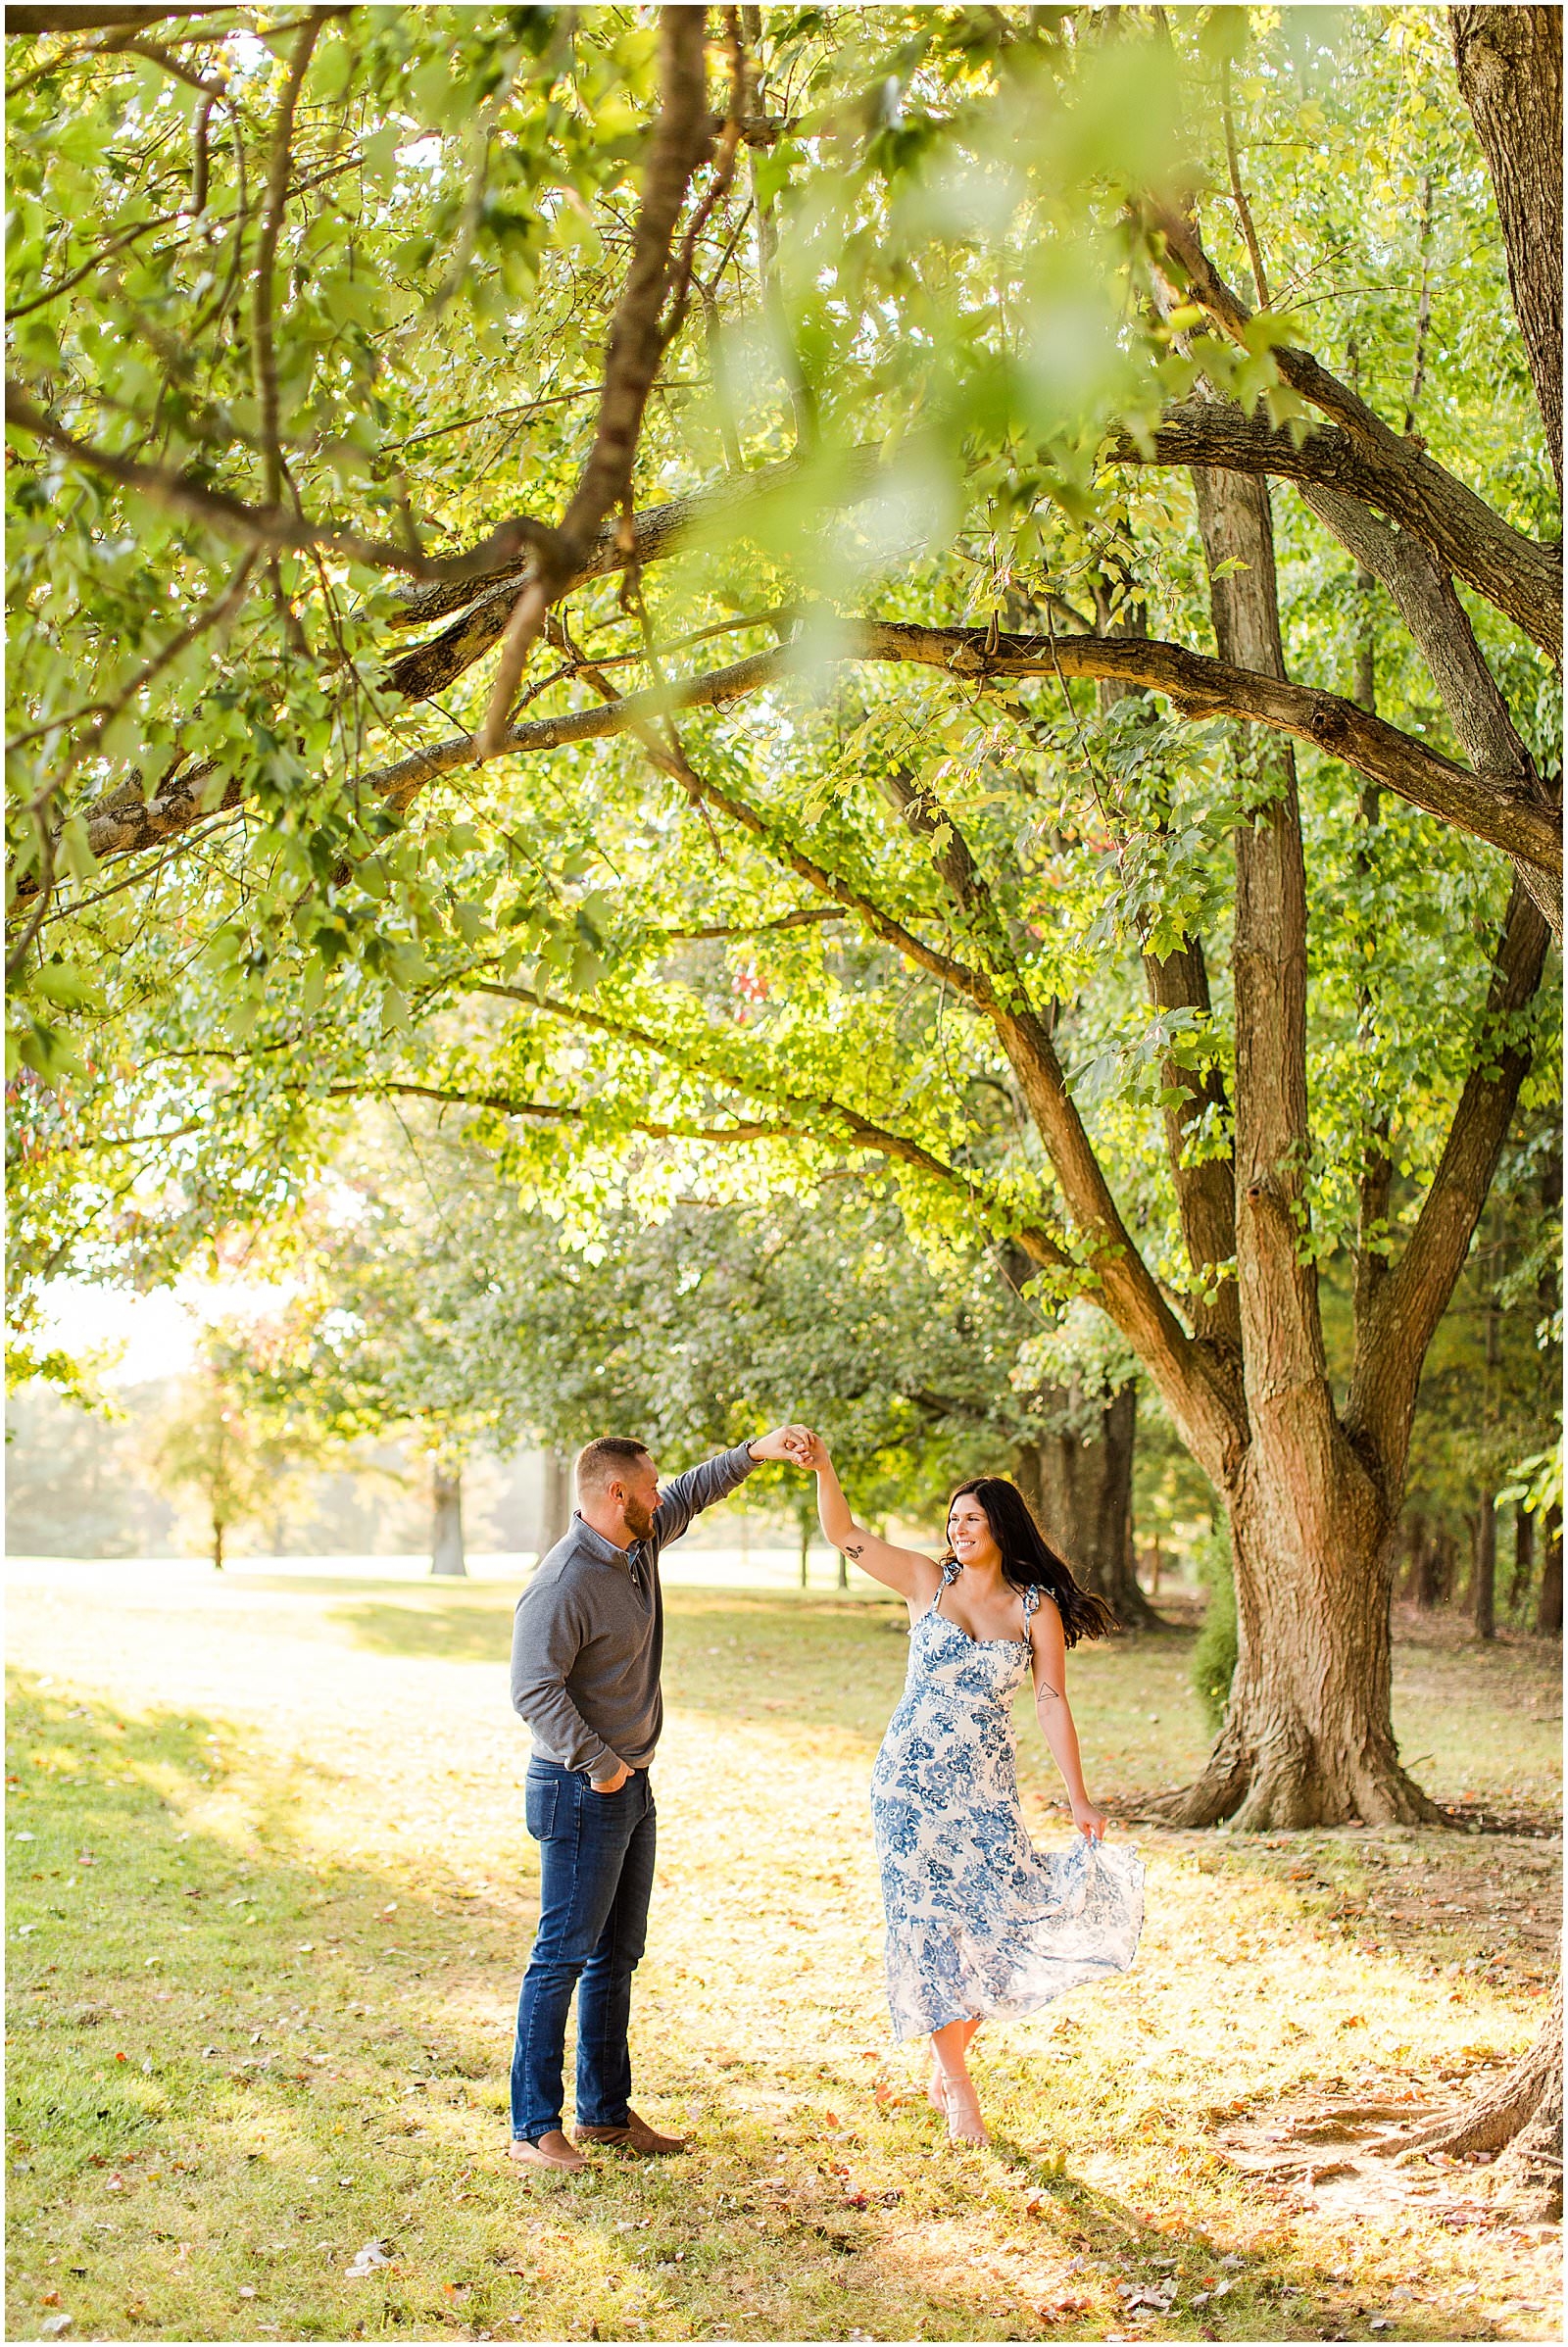 A Rolling Hills Country Club Engagement Session | Meagan and Kyle | Bret and Brandie Photography 0031.jpg